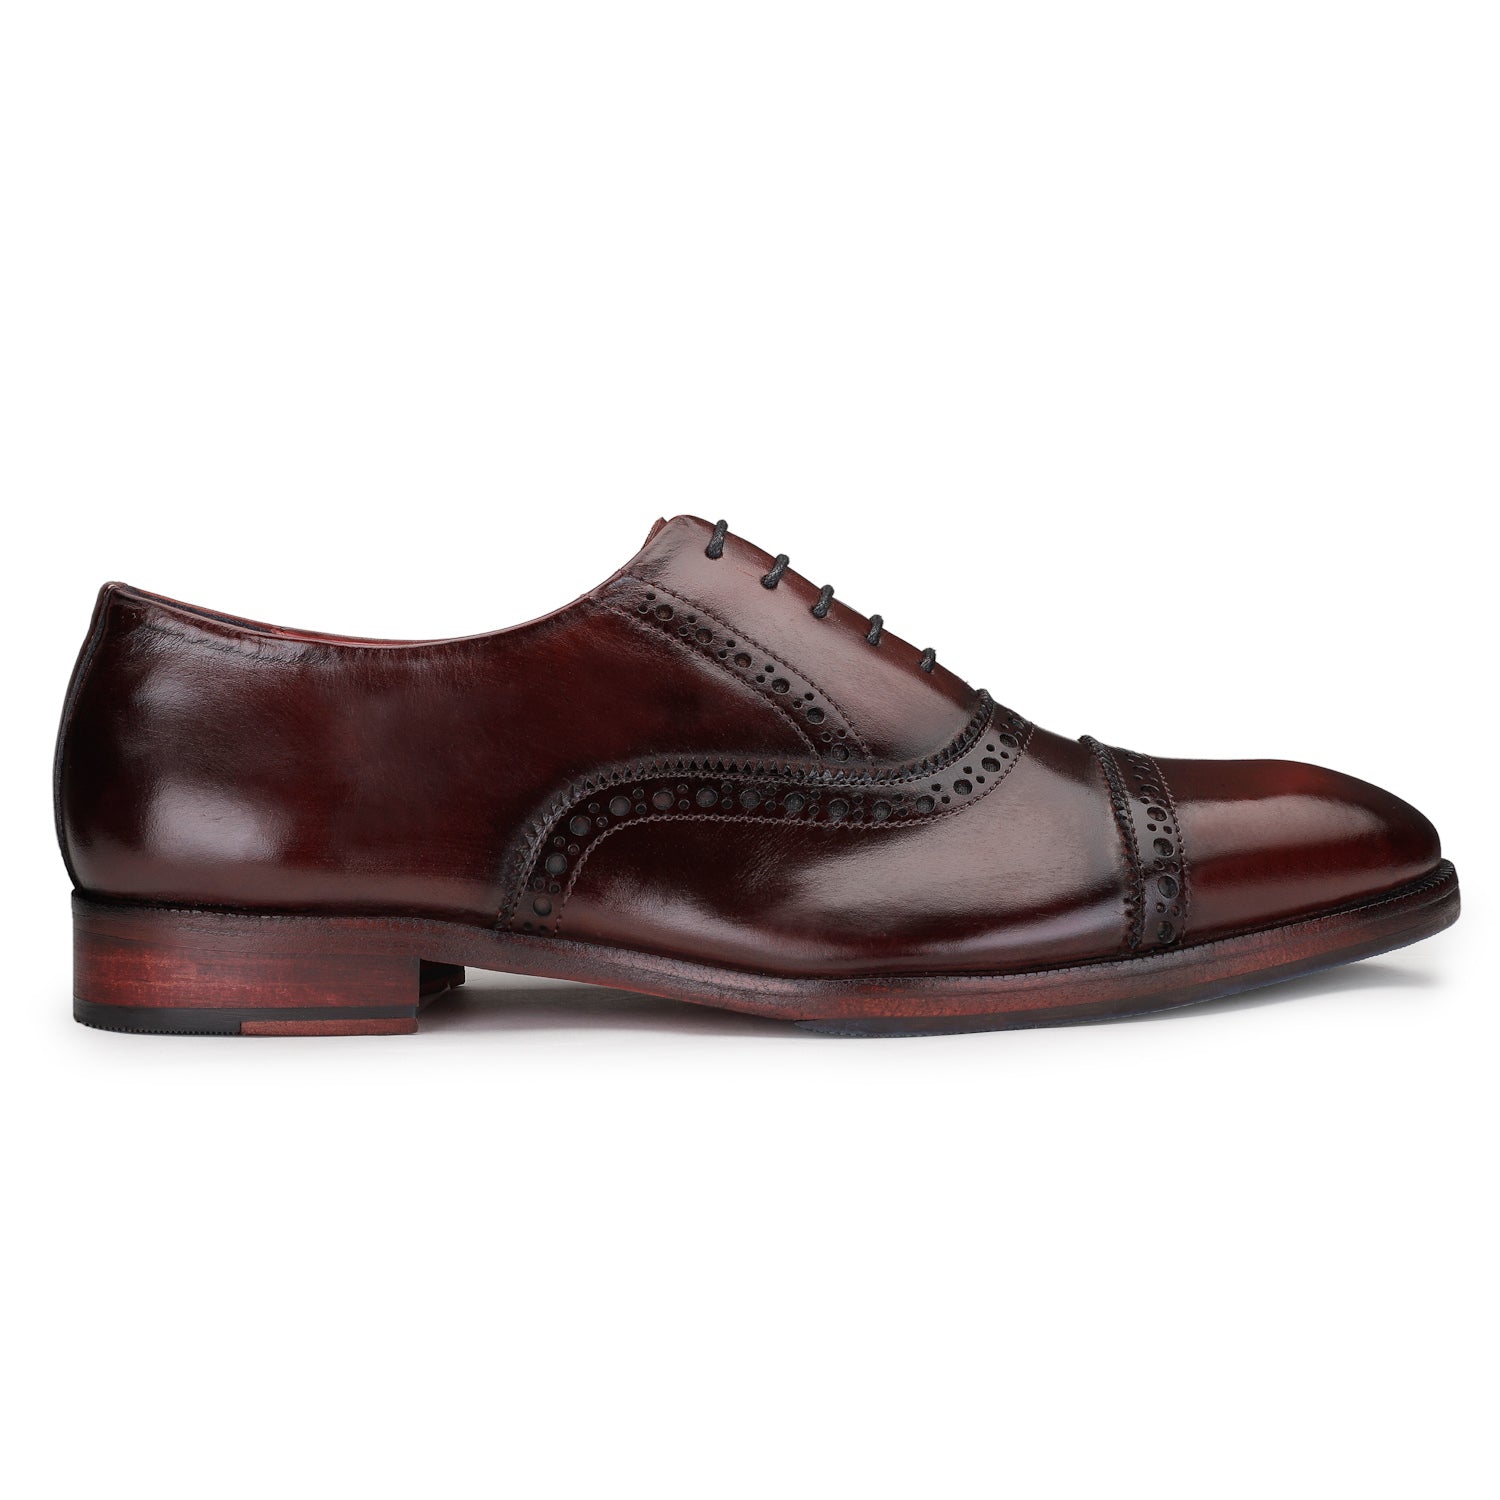 Red Metallic Patent Leather Lace Up Mens Oxfords Dress Shoes